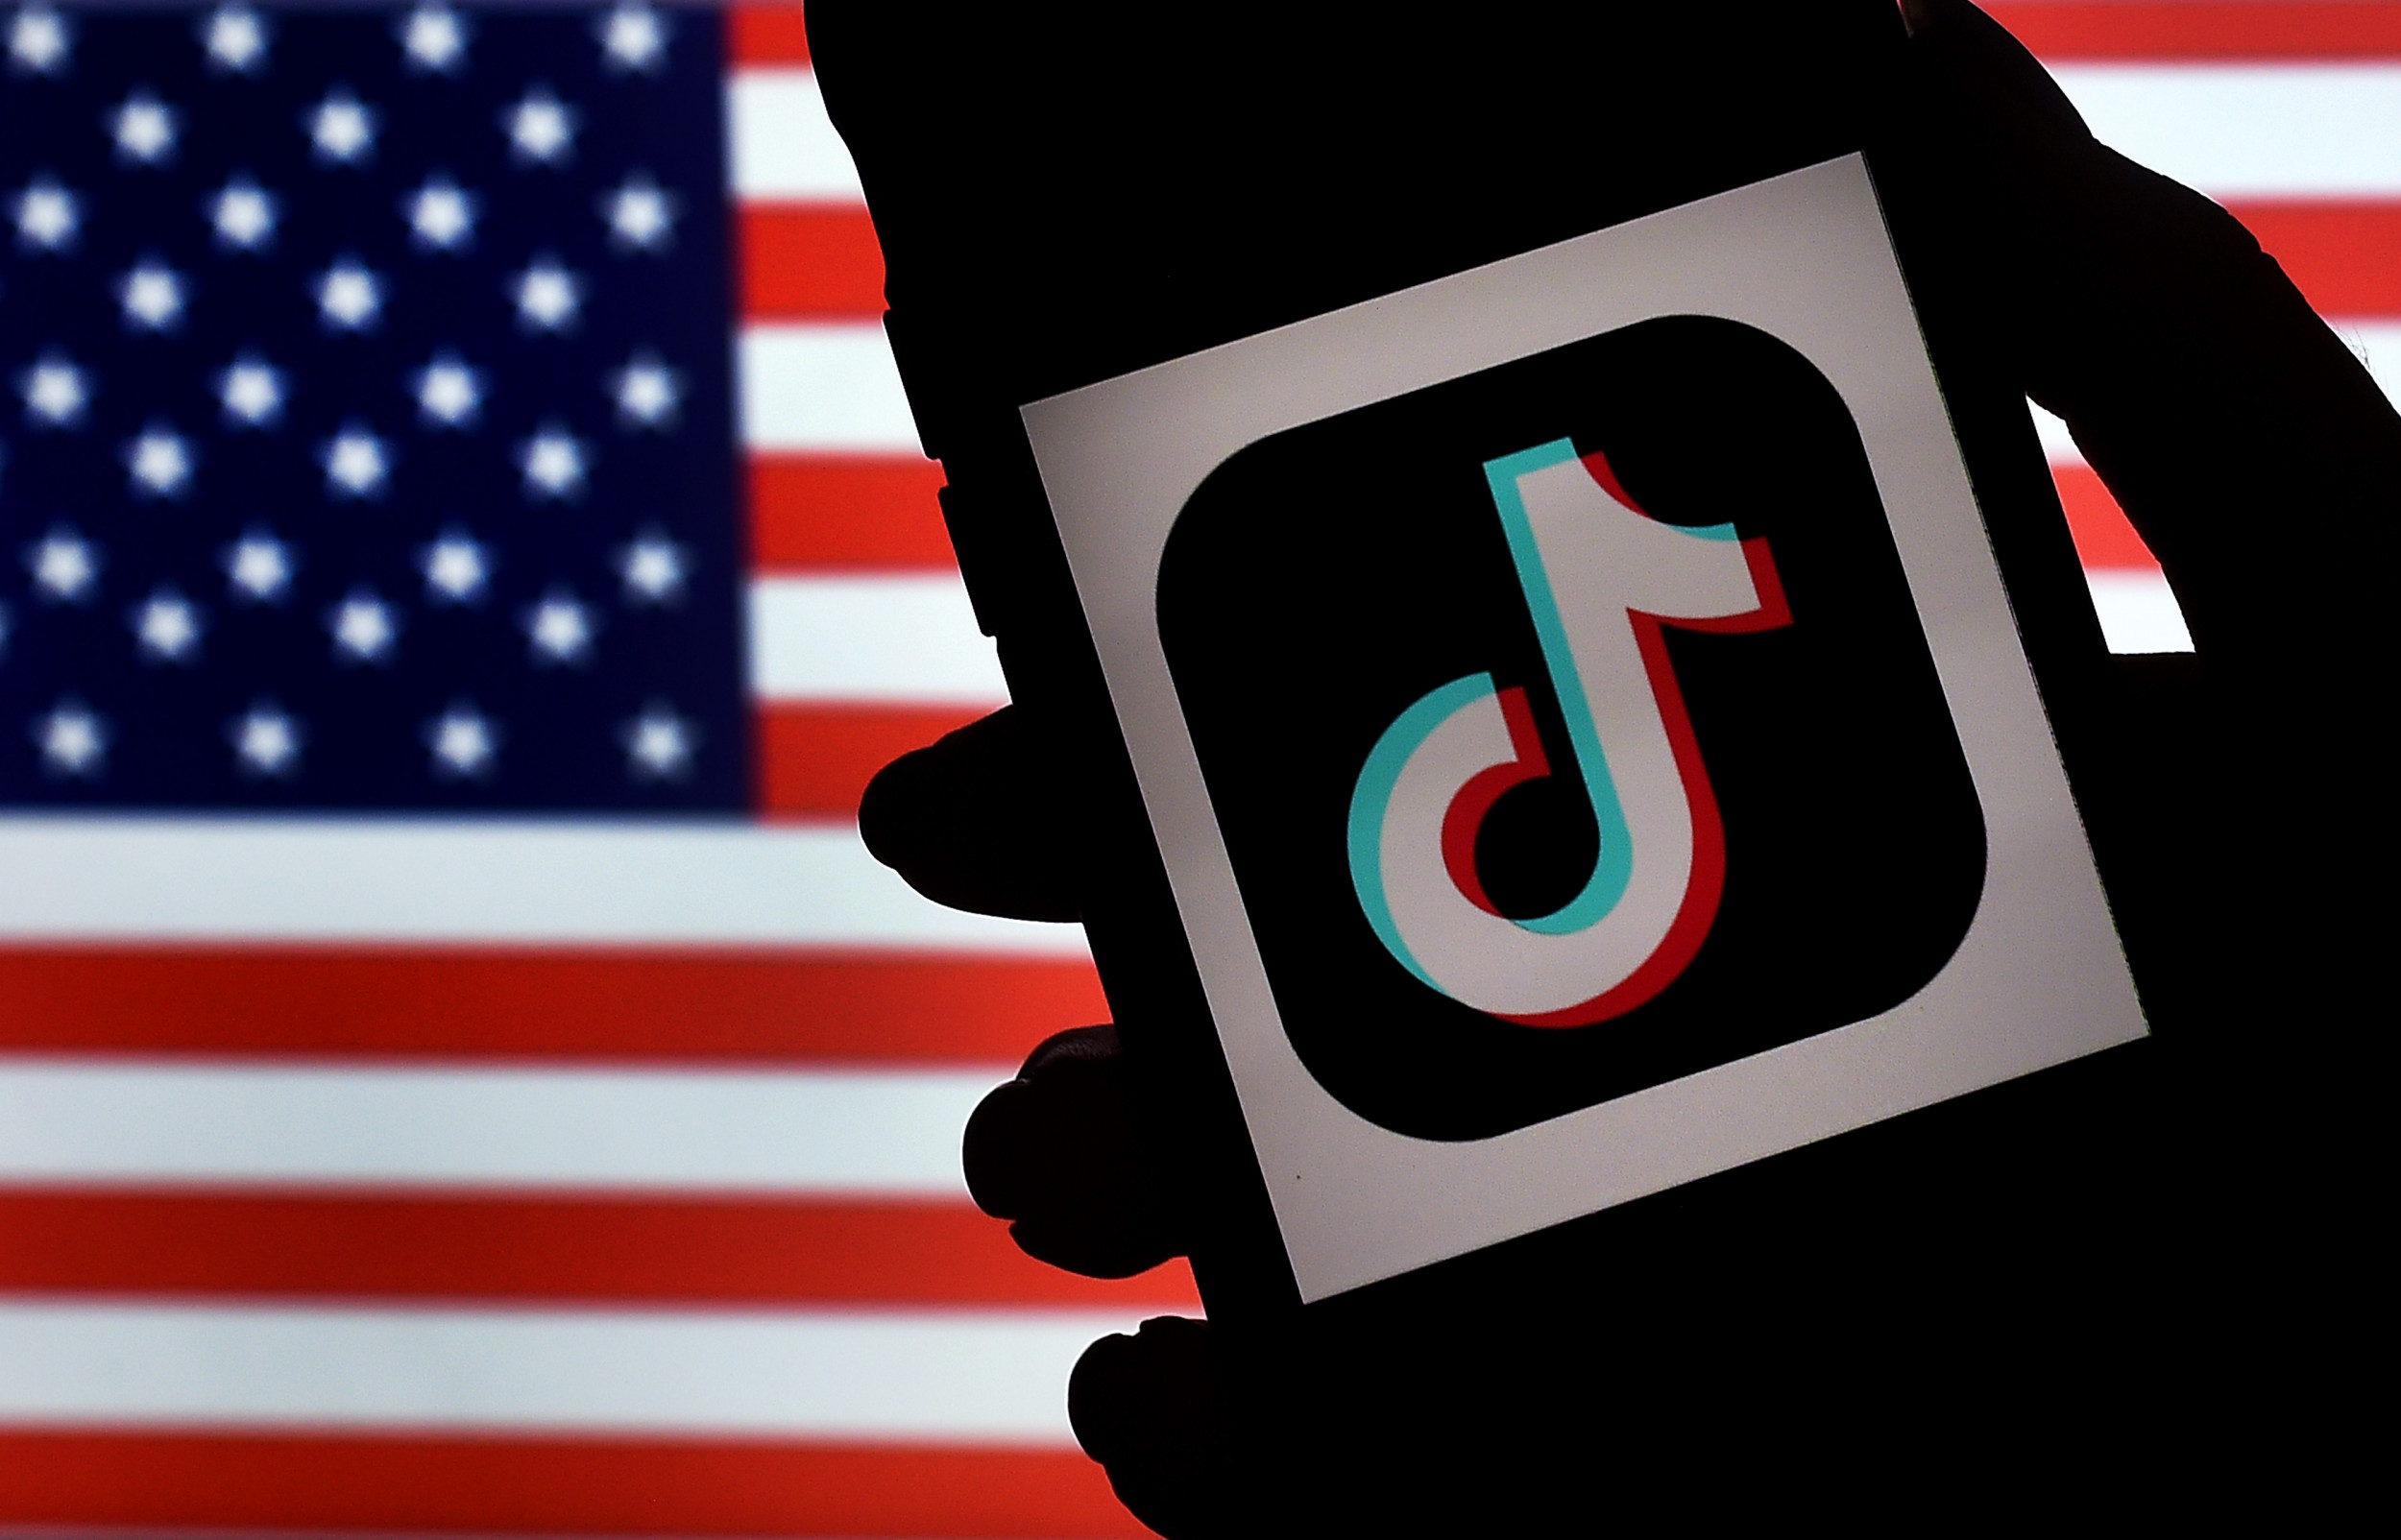 TikTok Denies Sharing User Information With China Amid Concerns About Safety of U.S. Data